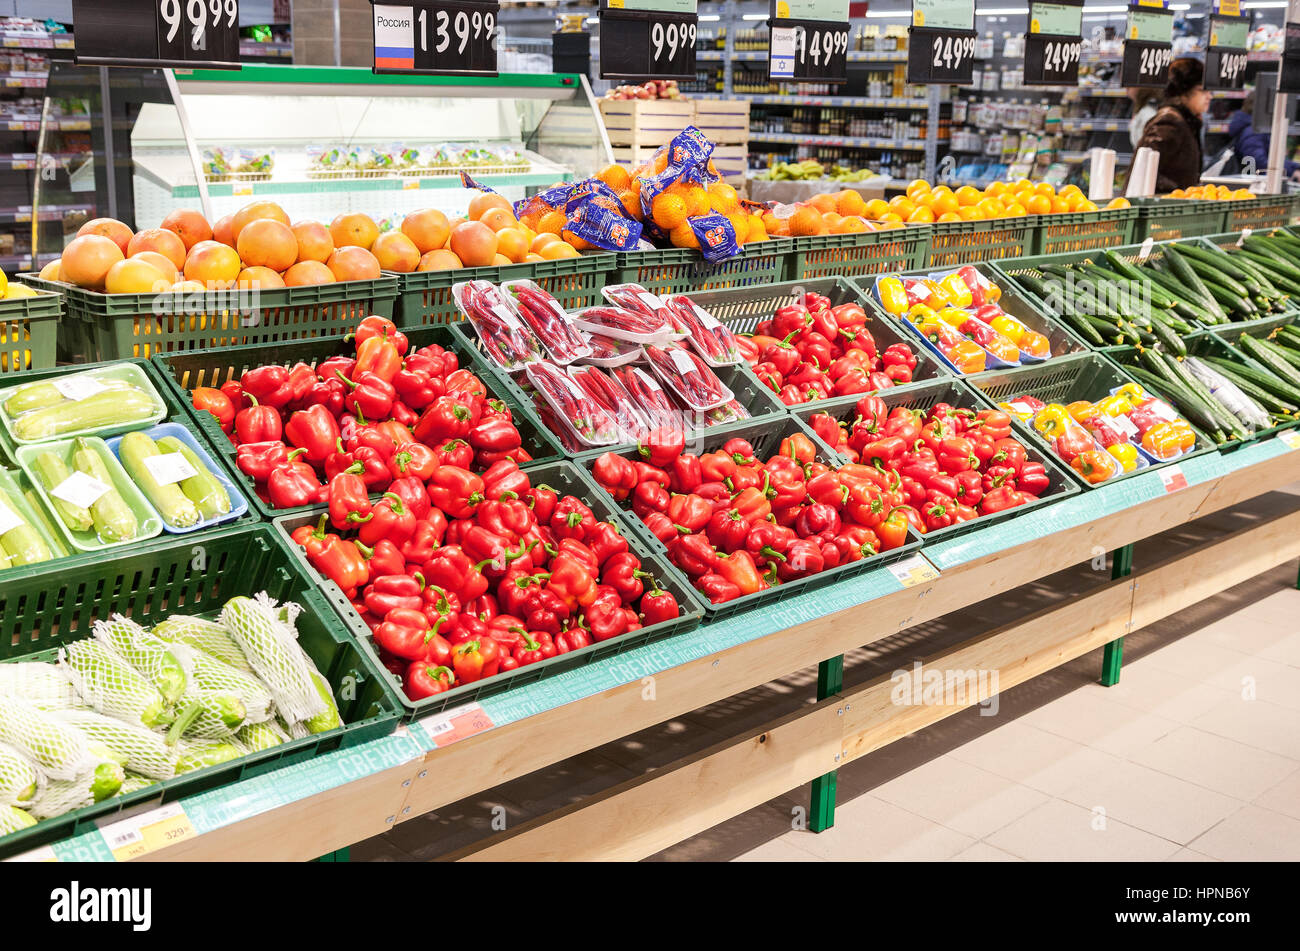 SAMARA, RUSSIA - JANUARY 2, 2017: Fresh vegetables and fruits ready for sale in supermarket Lenta. One of largest retailer in Russia Stock Photo